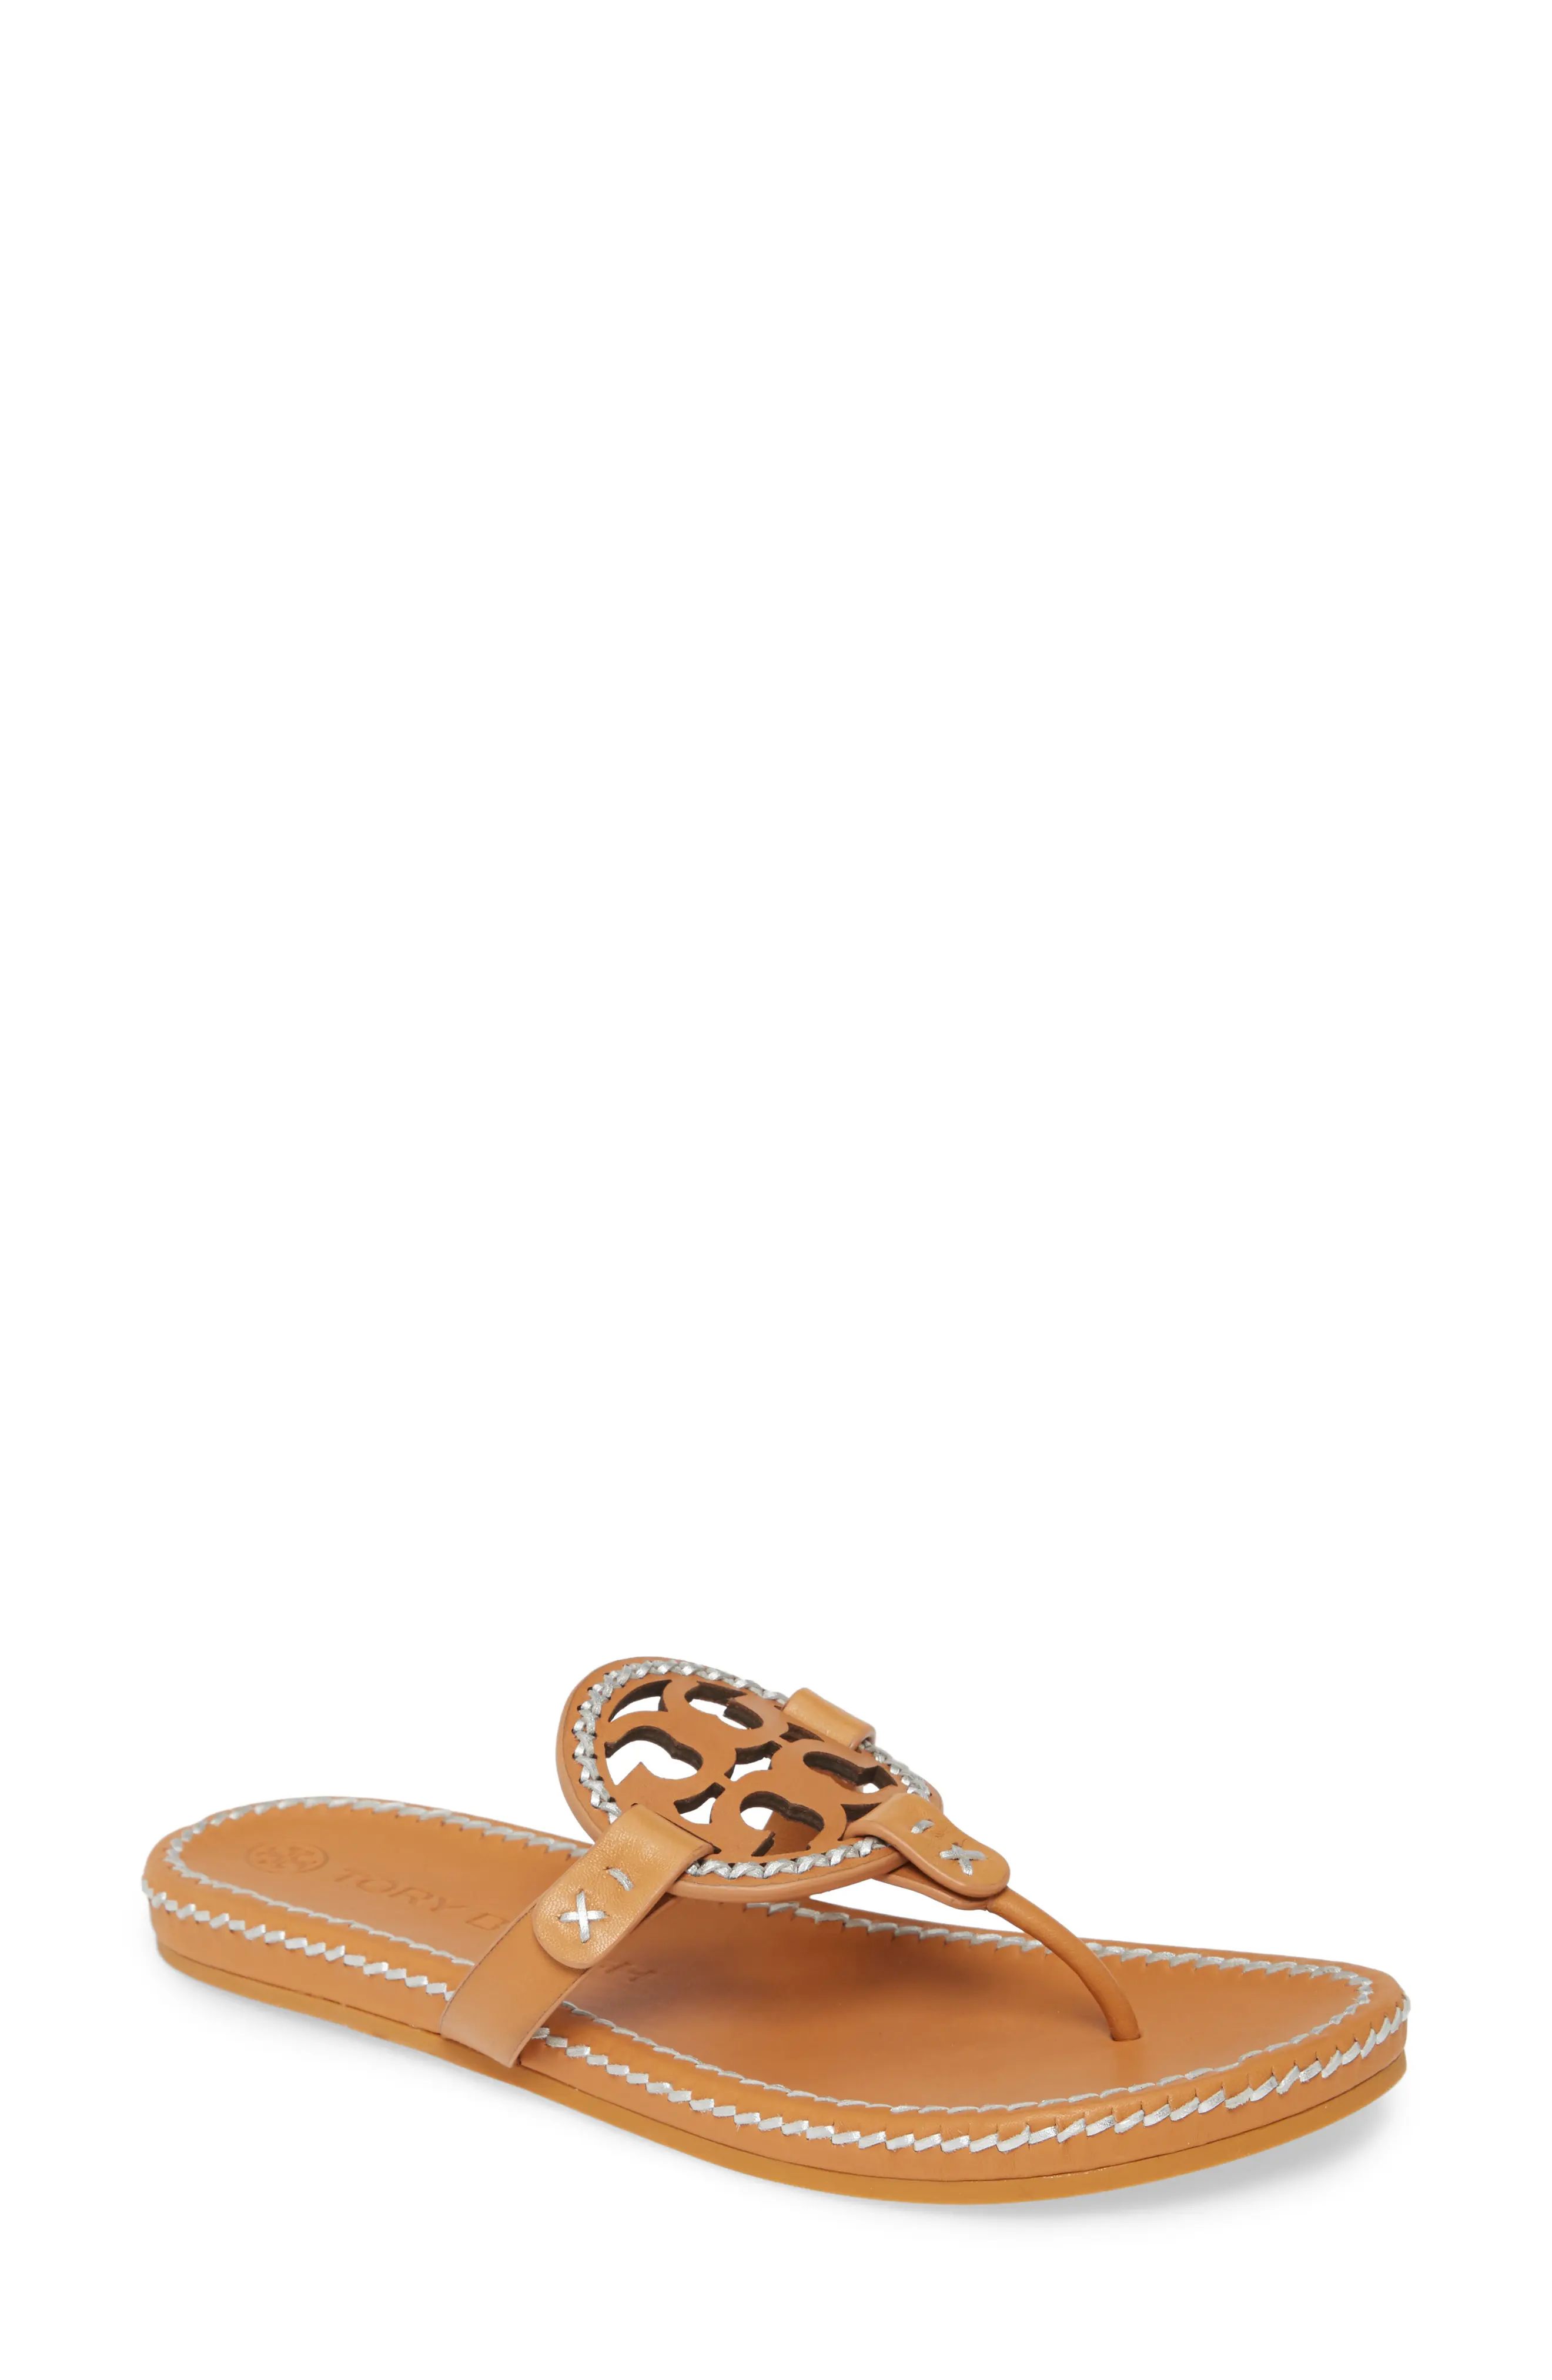 Women's Tory Burch Miller Whipstitch Sandal, Size 5.5 M - Brown | Nordstrom